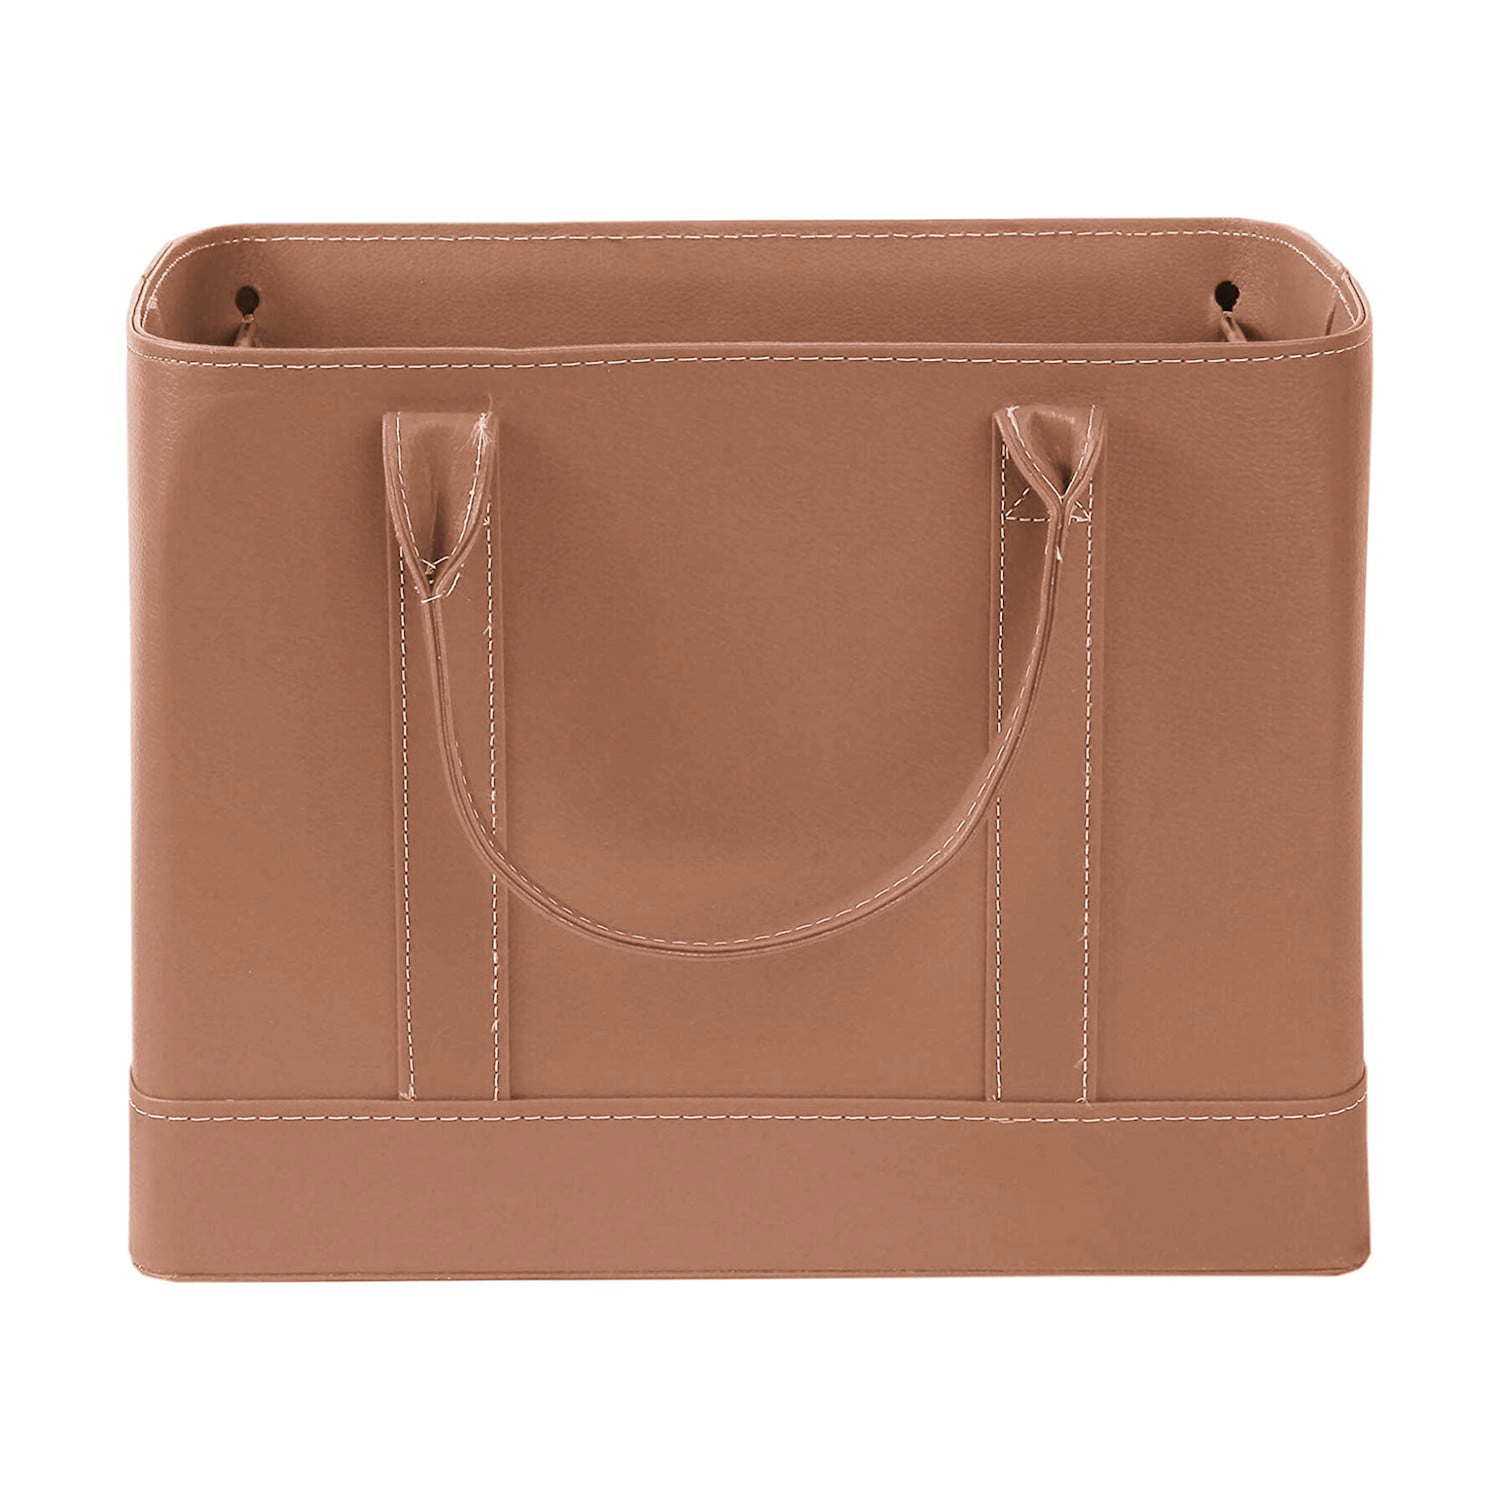 File Organizer Tote Up To, Leather File Folder Tote